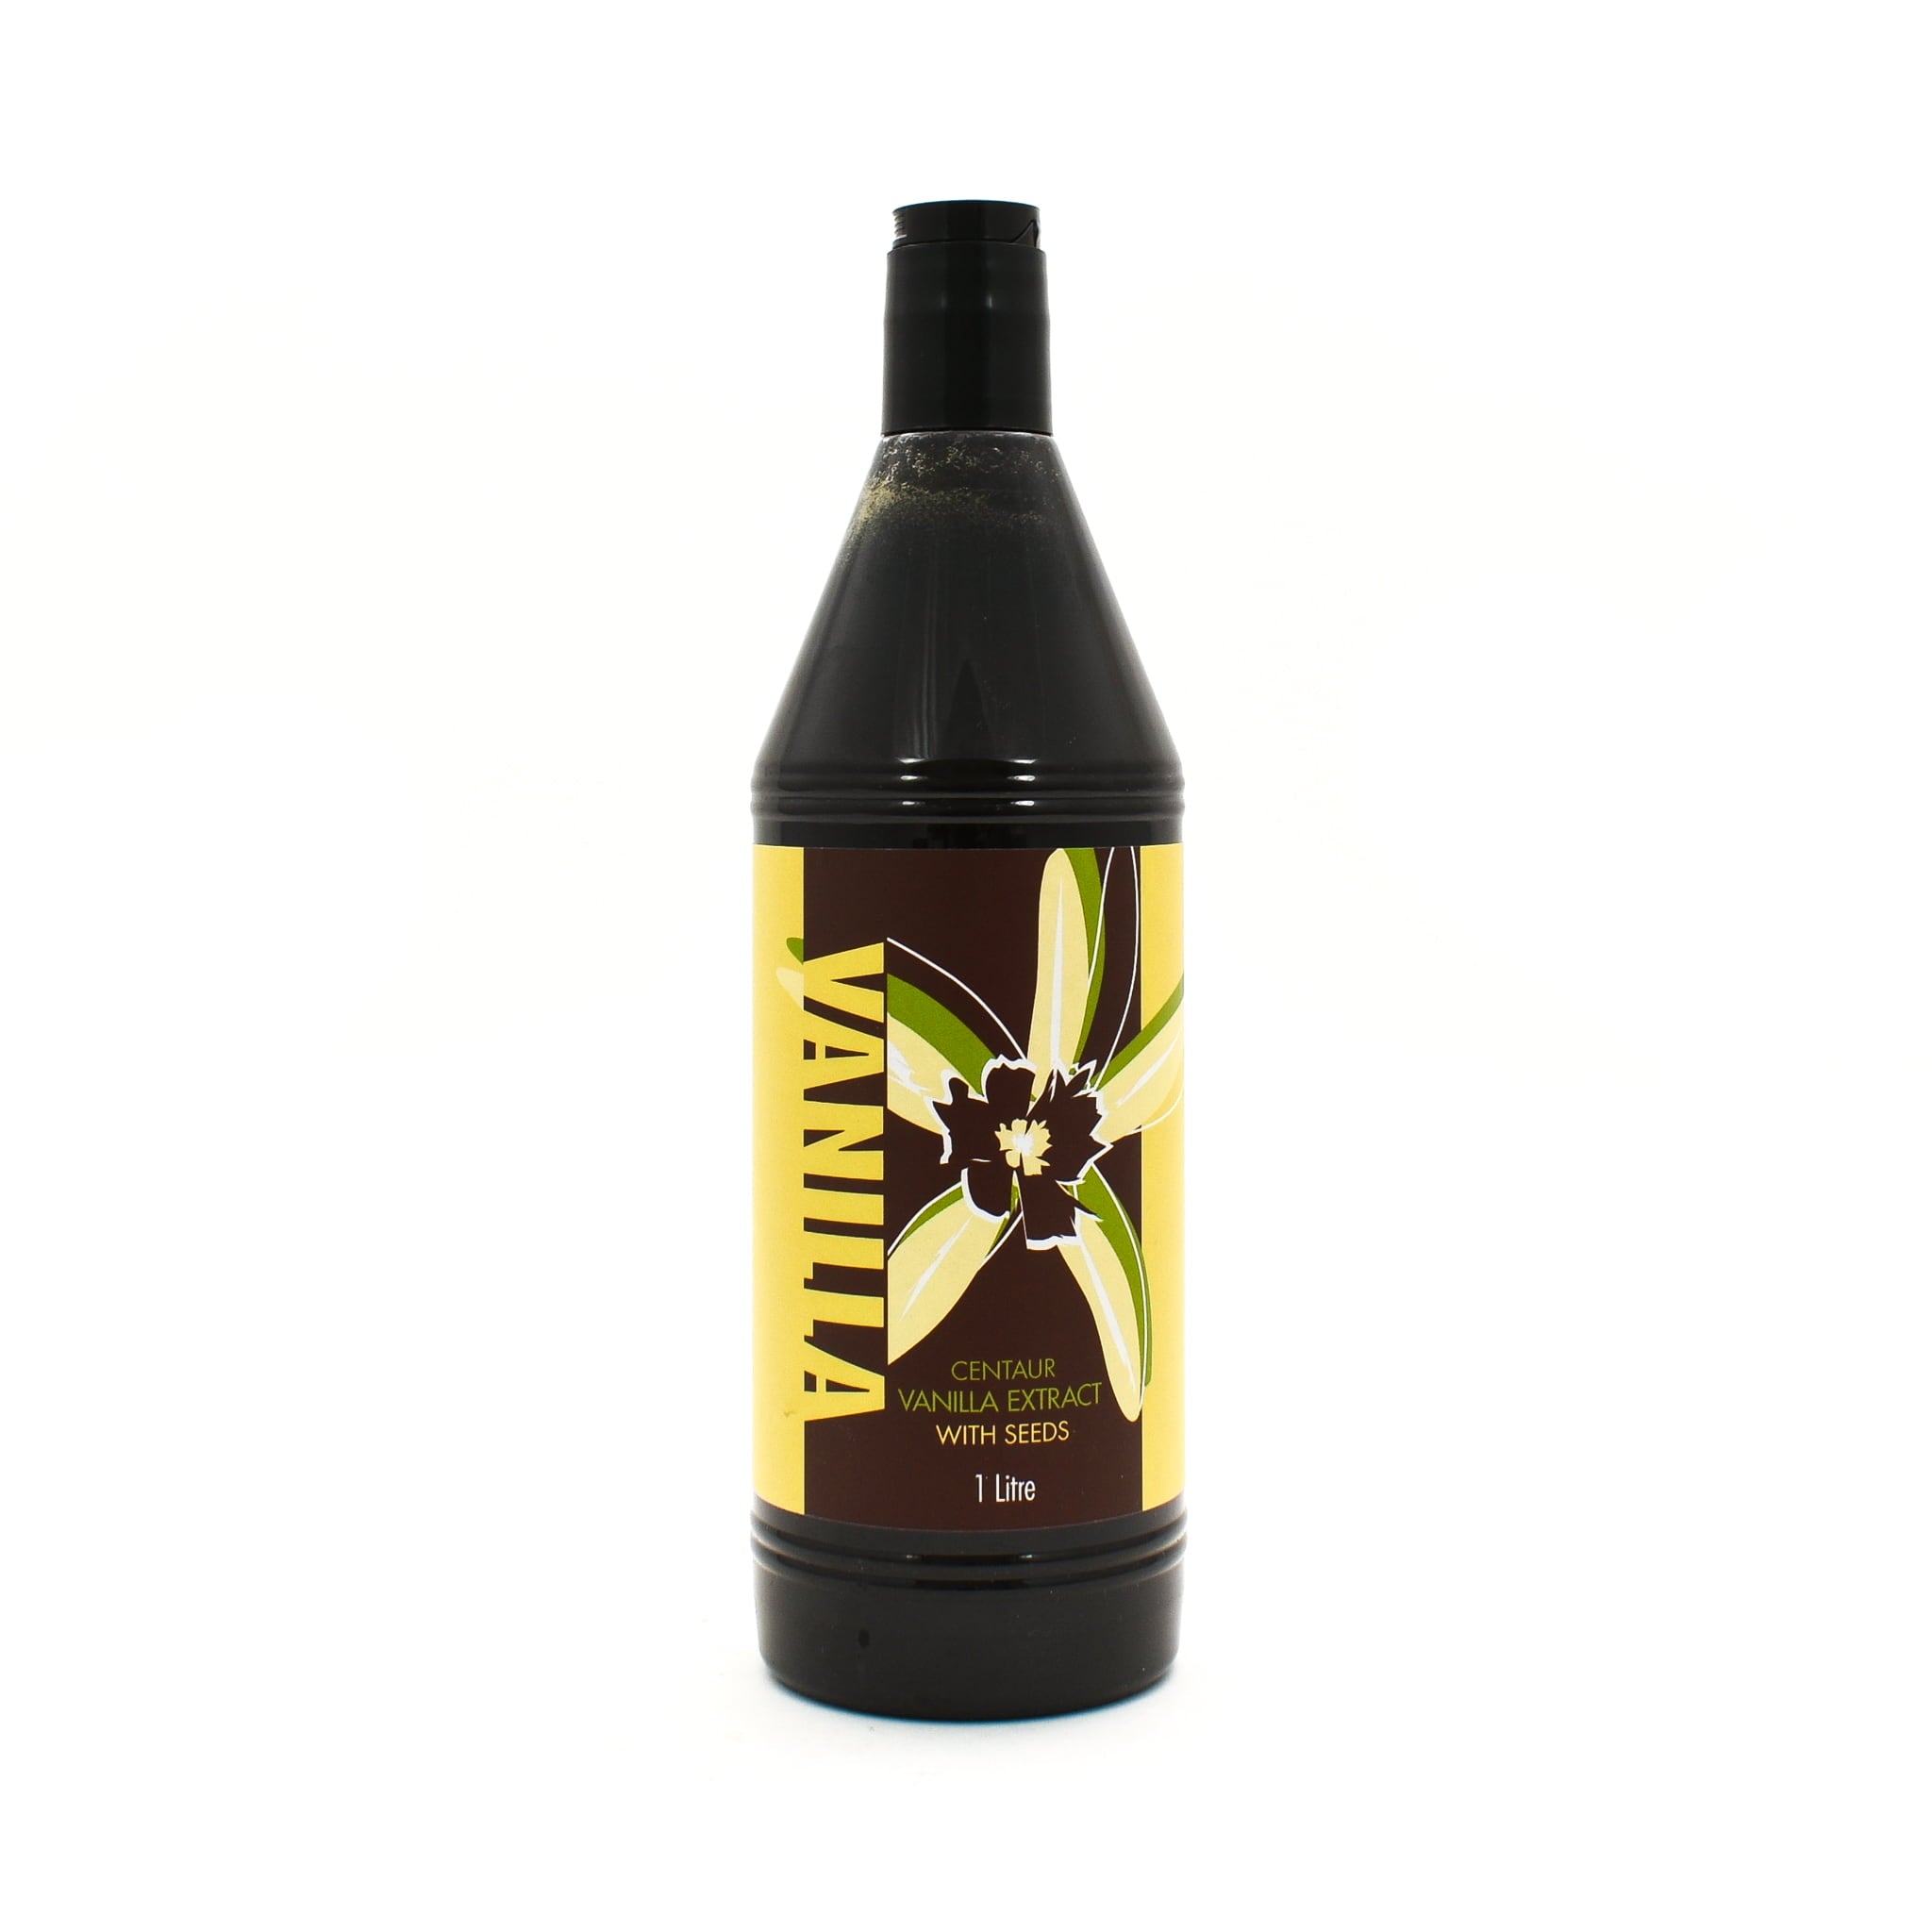 Vanilla Extract With Seeds, 1 litre